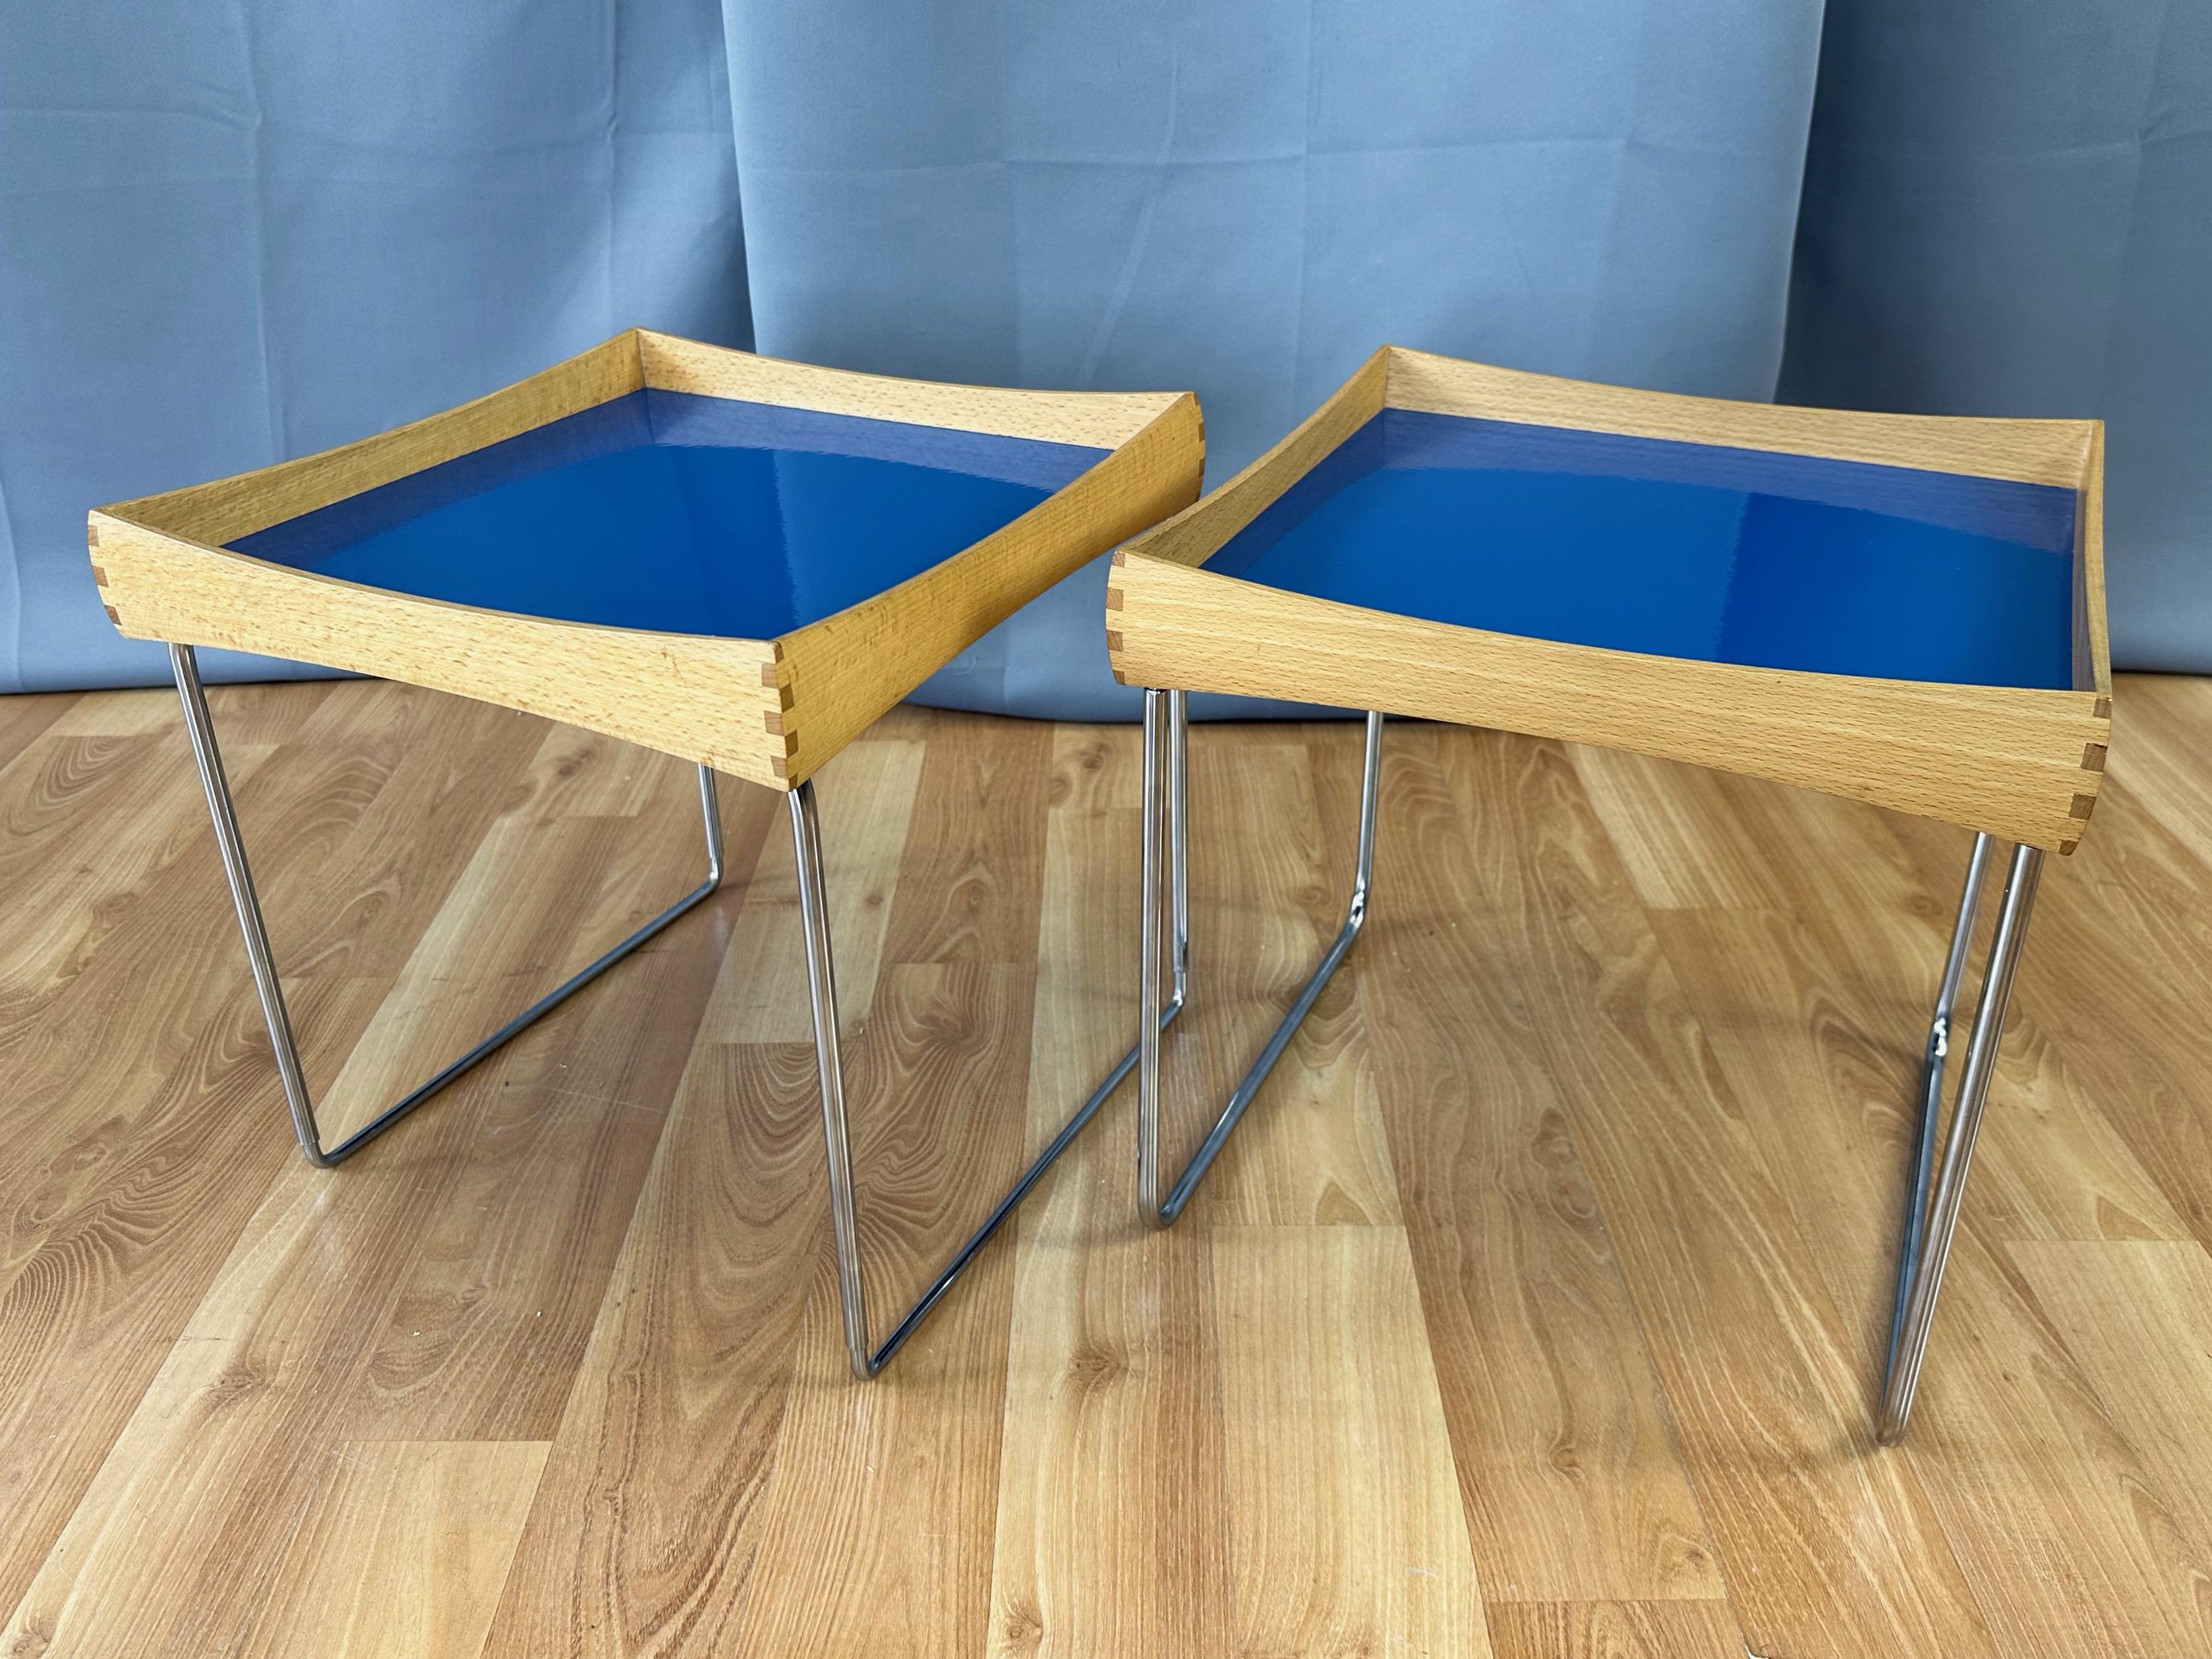 A delightful pair of 1961 Norwegian Conform tray tables by Hermann Bongard for Plus in very rare beech with solid blue Catherineholm enameled steel tops.

Designed in 1961 by notable Norwegian industrial and graphic designer, glass artist, and